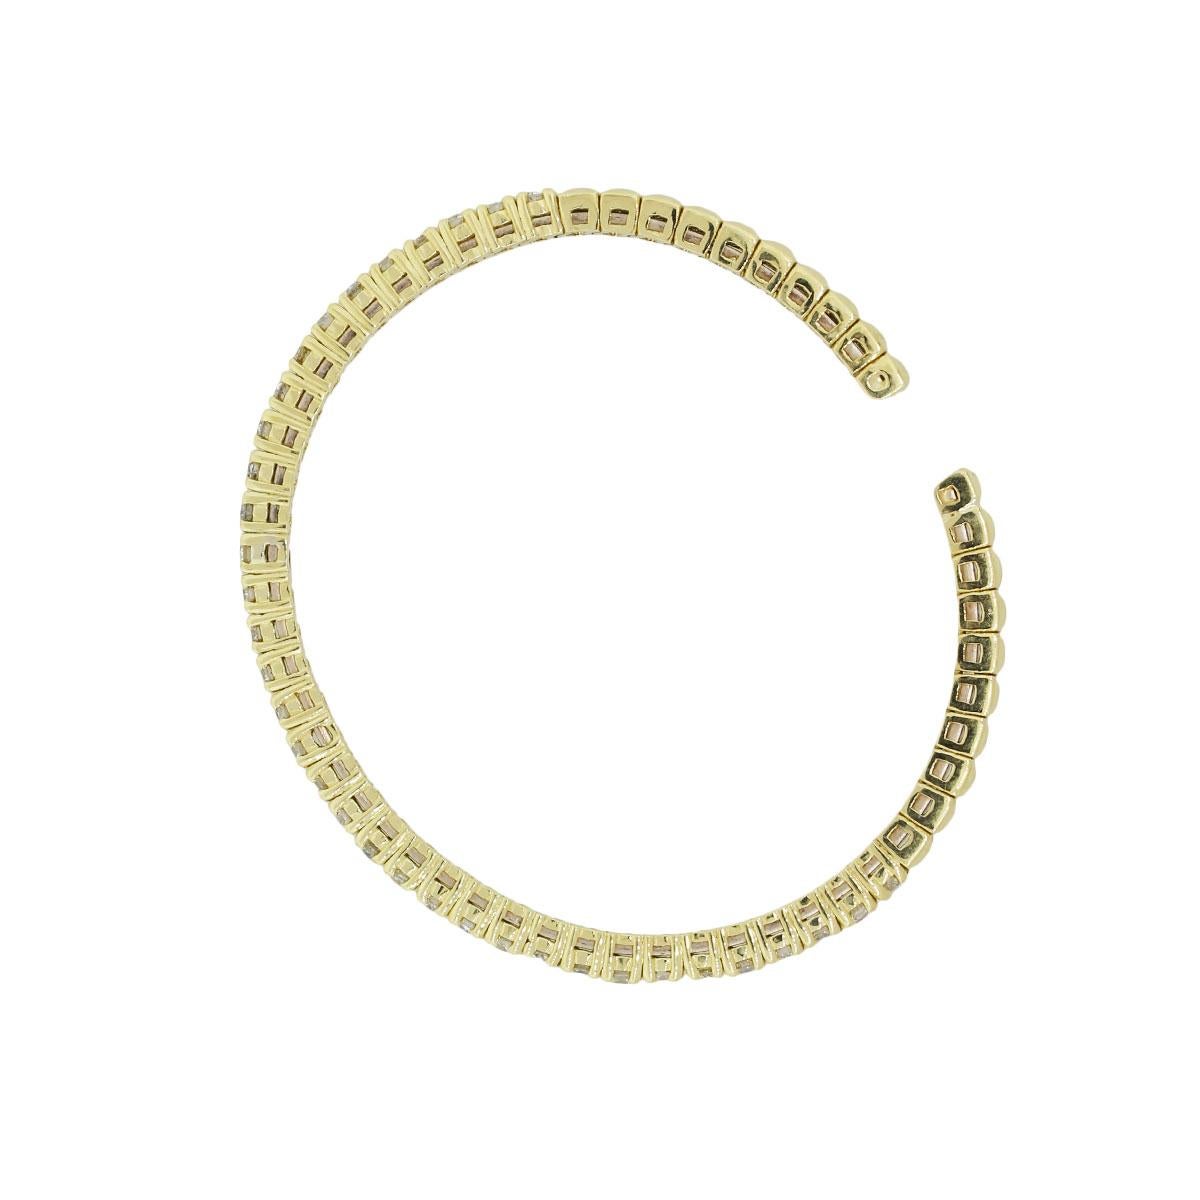 Material: 18k yellow, white and rose gold
Diamond Details: Approximately 7ctw of round brilliant diamonds. Diamonds are G/H in color and VS in clarity
Clasp: Flexible (Wrap Around)
Measurement: Each bangle cuff will fit a 5.50″ wrist
Total Weight: